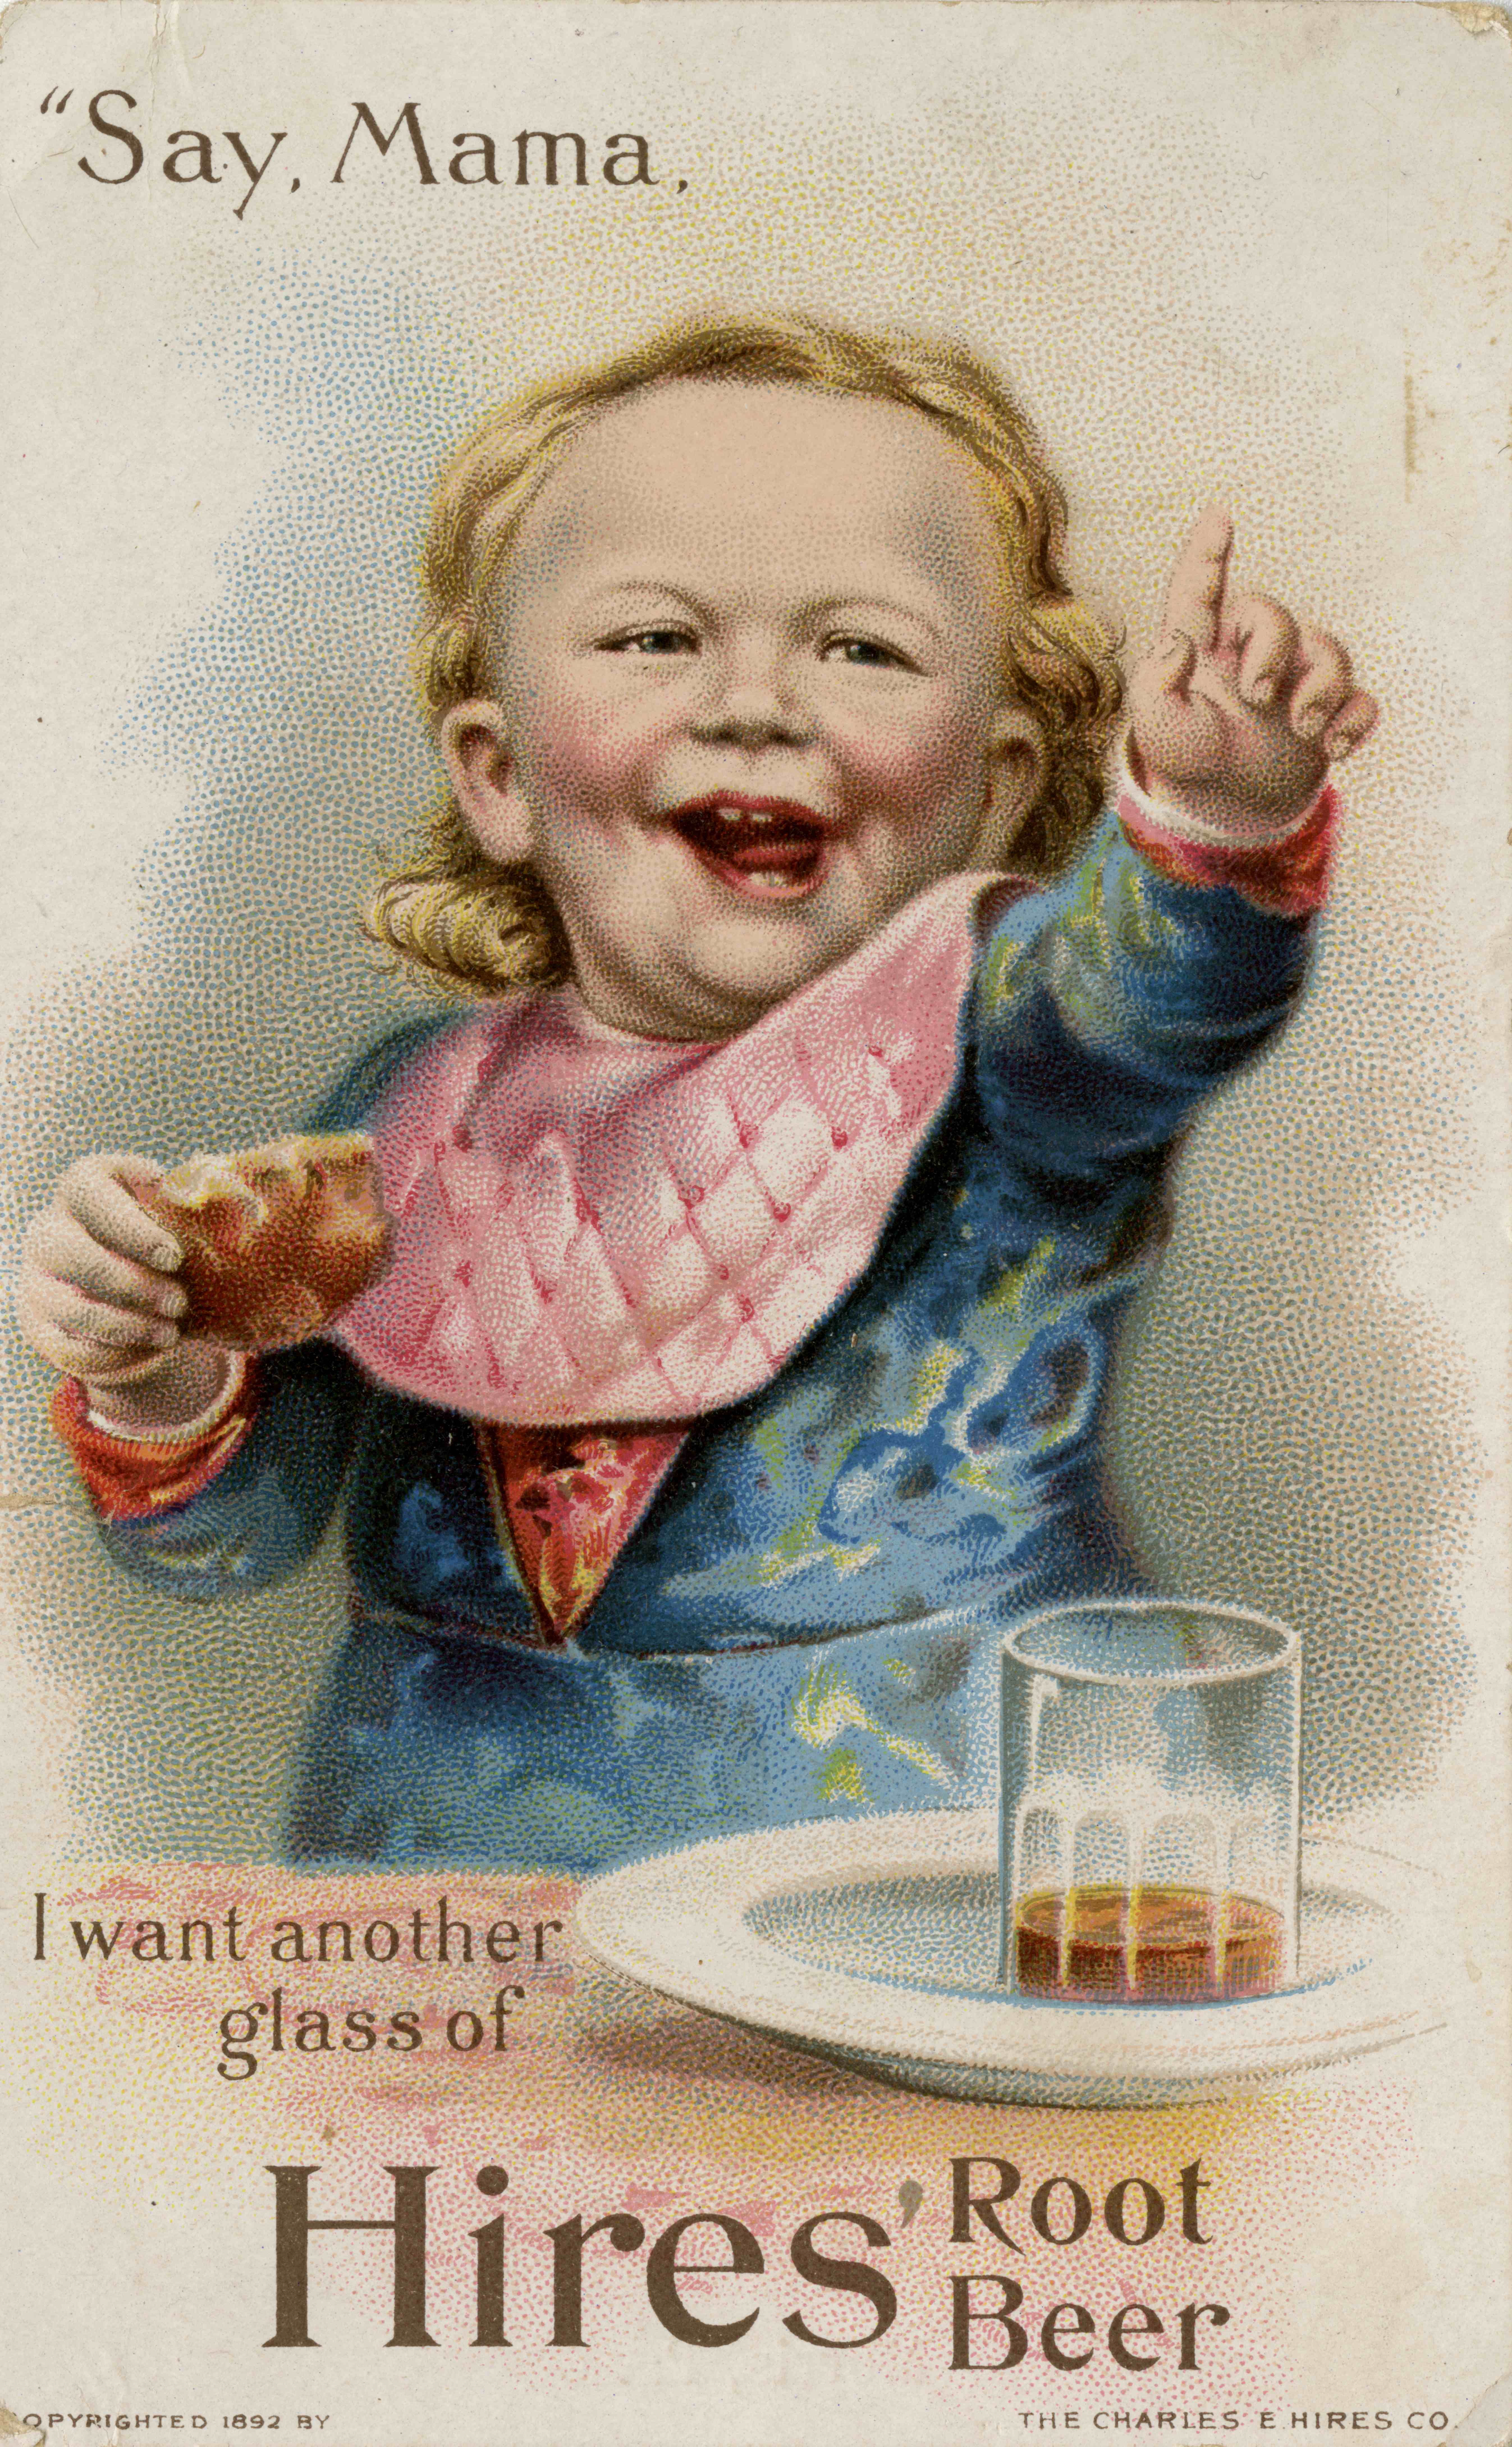 Advertisement featuring an illustration of a toddler with food and a glass of root beer. Text reads "Say, Mama, I want another glass of Hires Root Beer'.